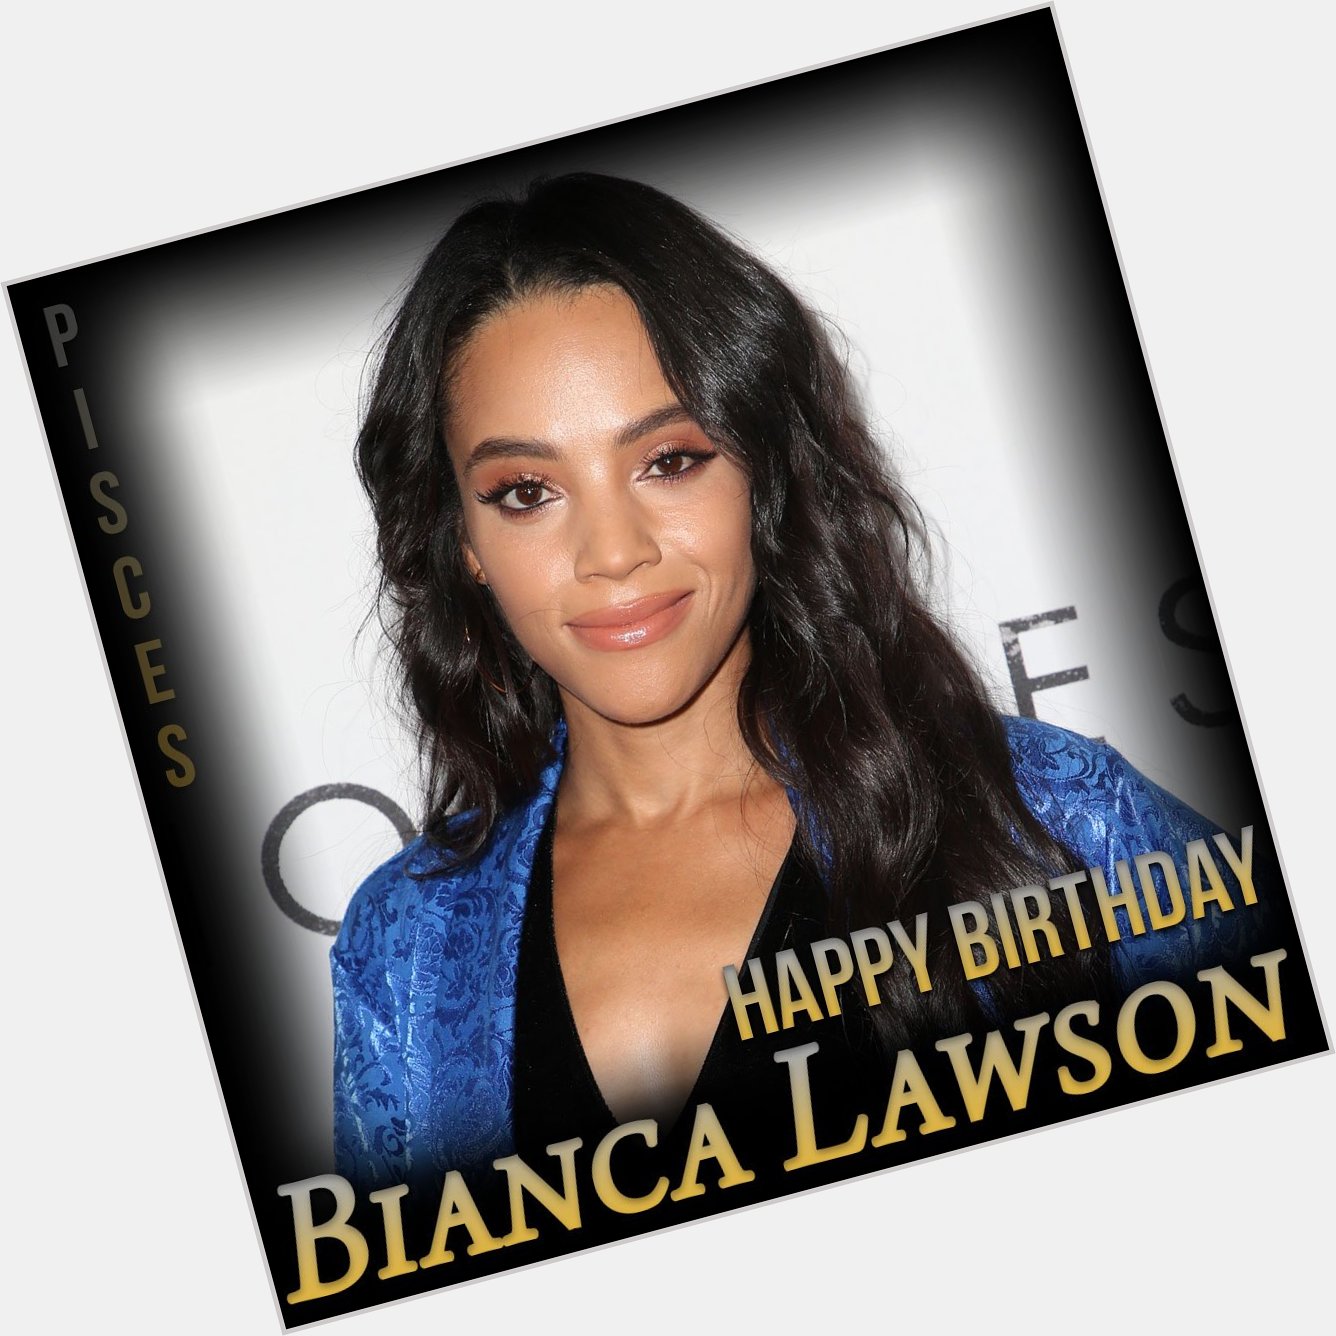 Happy Birthday to the beautiful and ageless Bianca Lawson! The actress turns 40 today! 